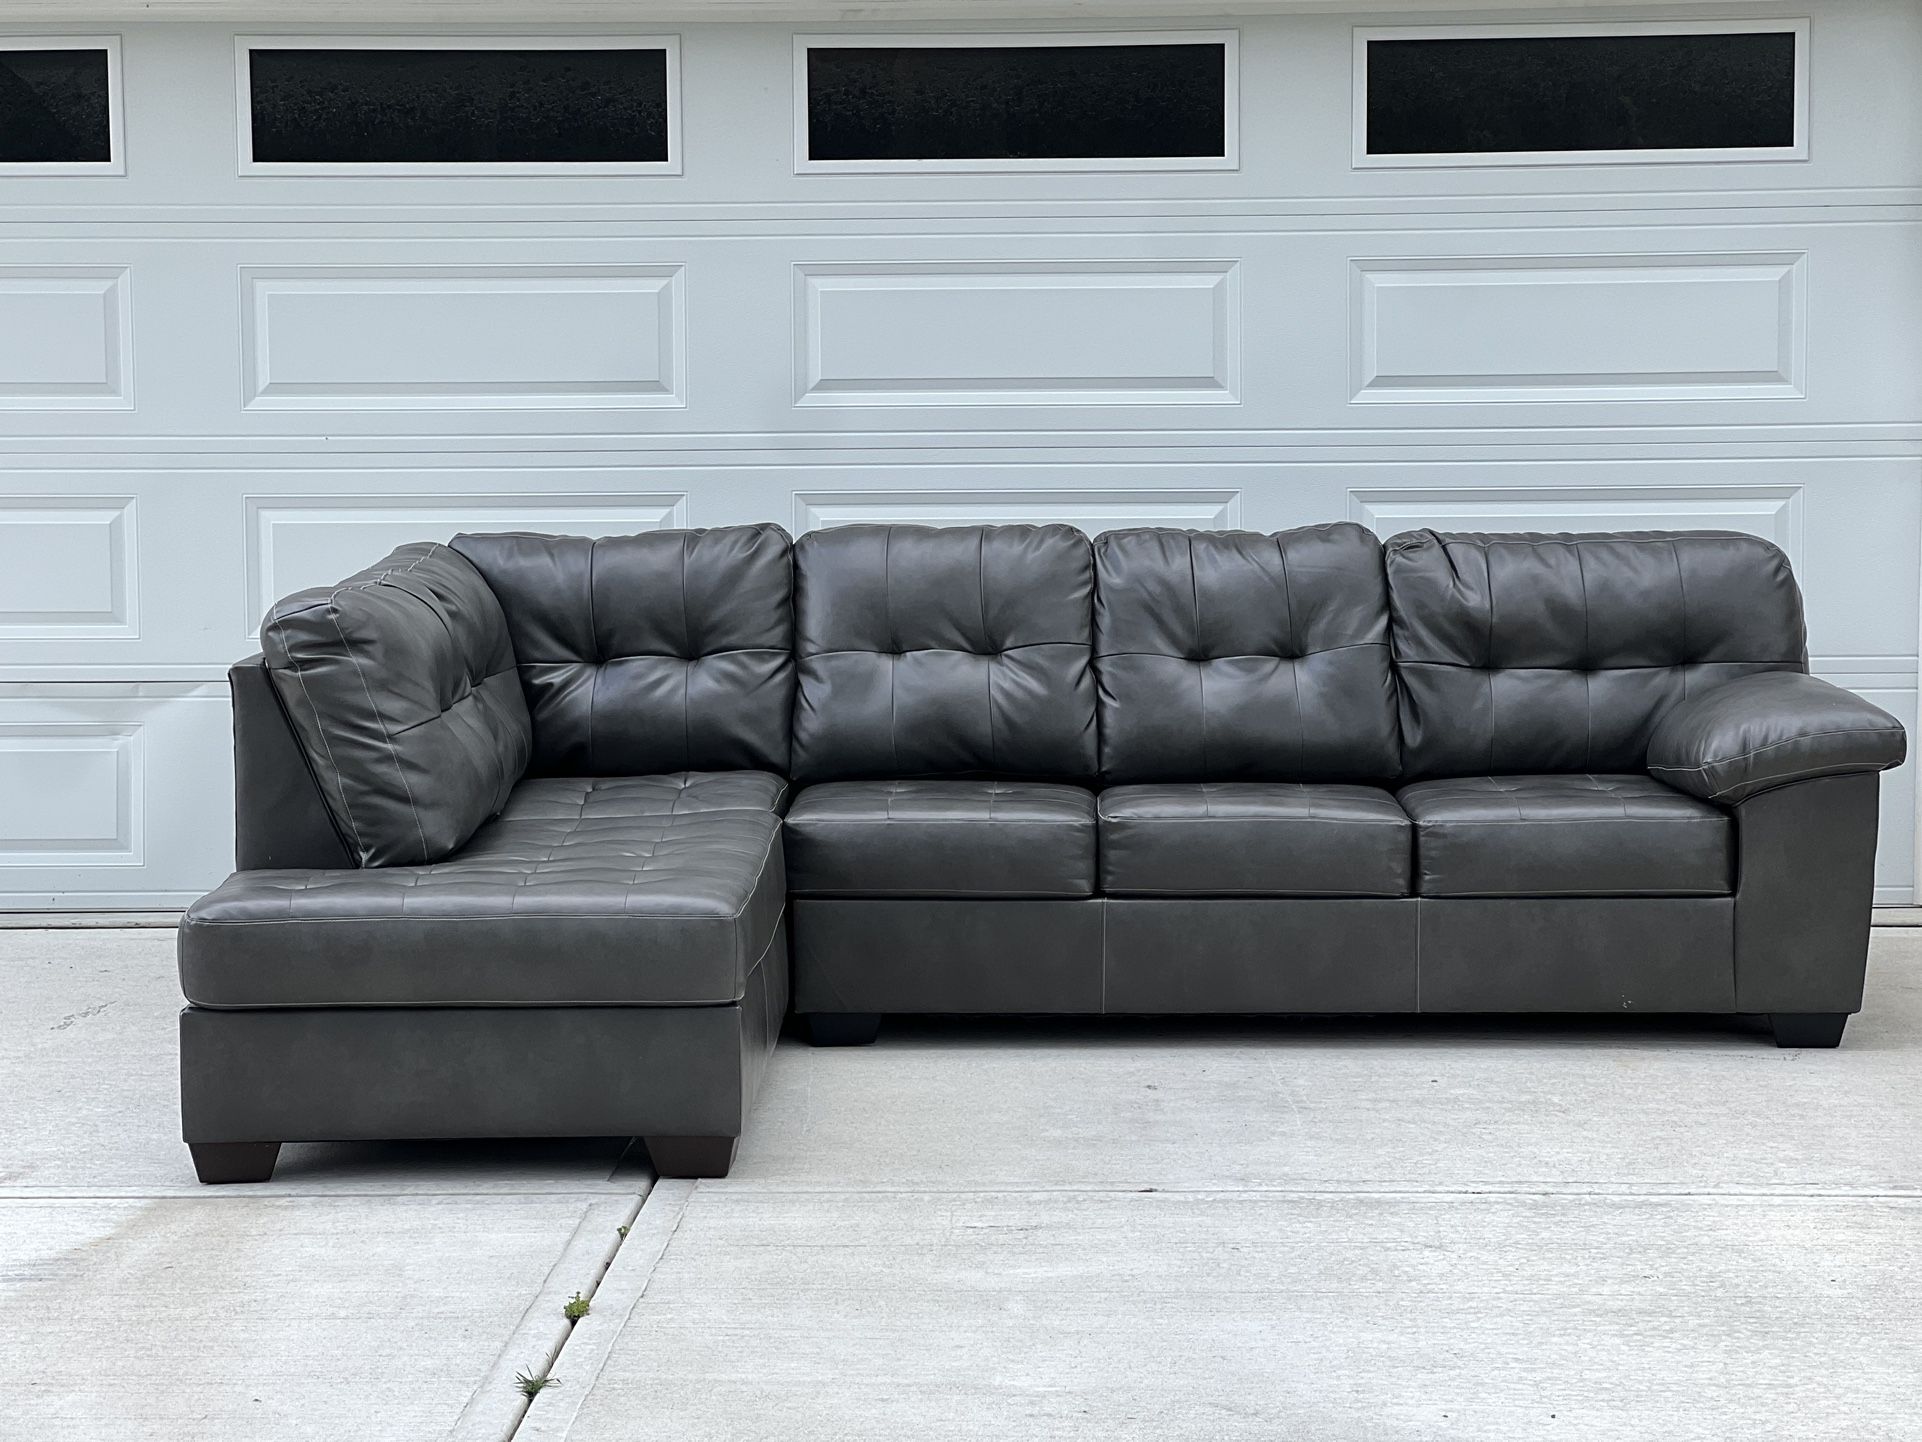 ⚪️Ashley Furniture Leather Sectional